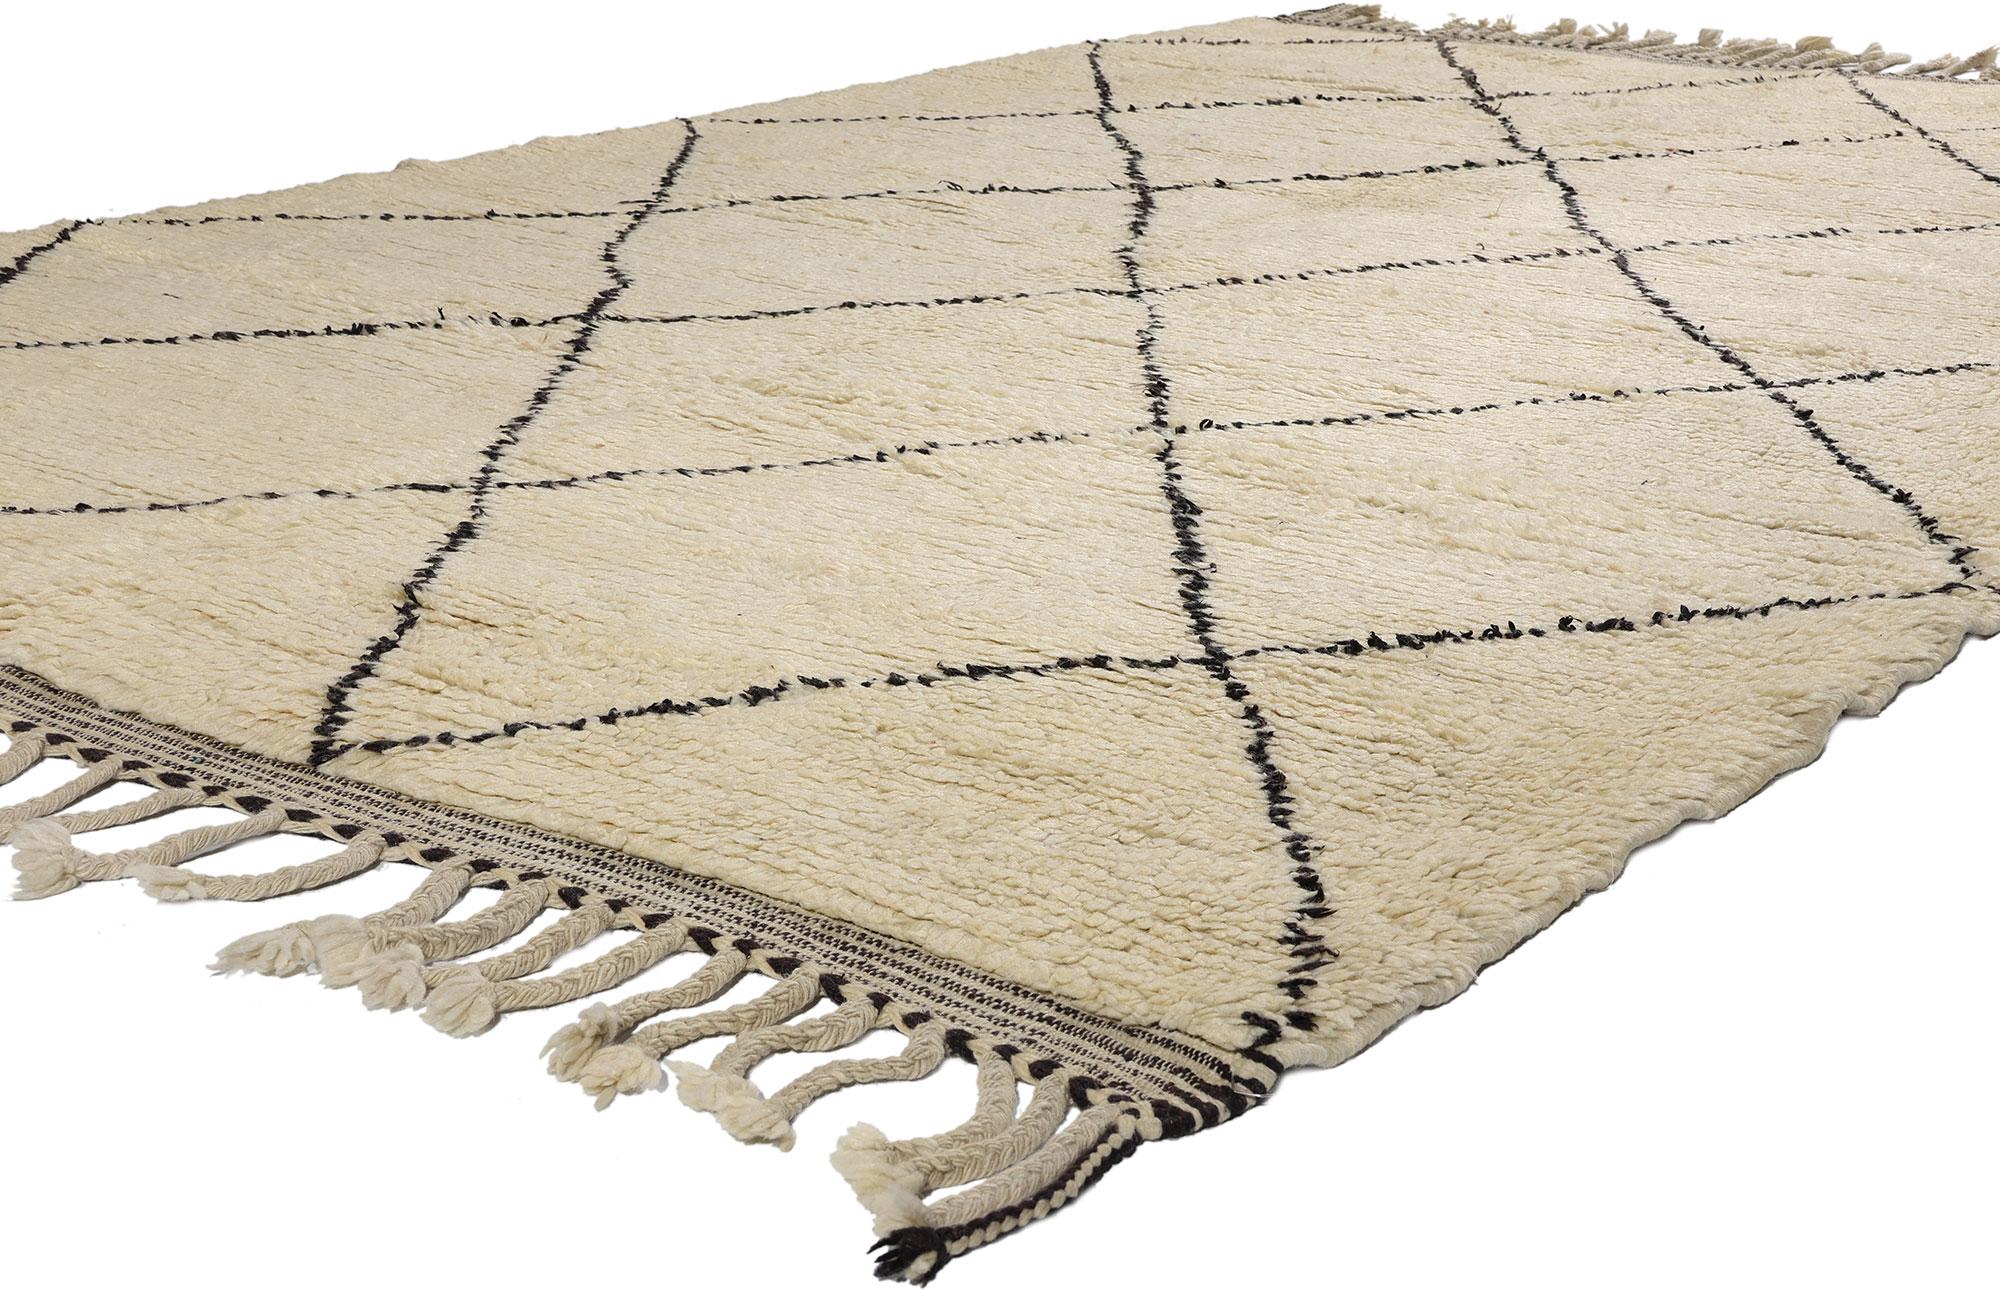 21828 Vintage Moroccan Beni Ourain Rug, 06'08 x 09'10. Originating from the Beni Ourain tribe, an integral part of the broader Berber ethnic group in Morocco, these Moroccan rugs are meticulously crafted using natural, undyed sheep's wool,